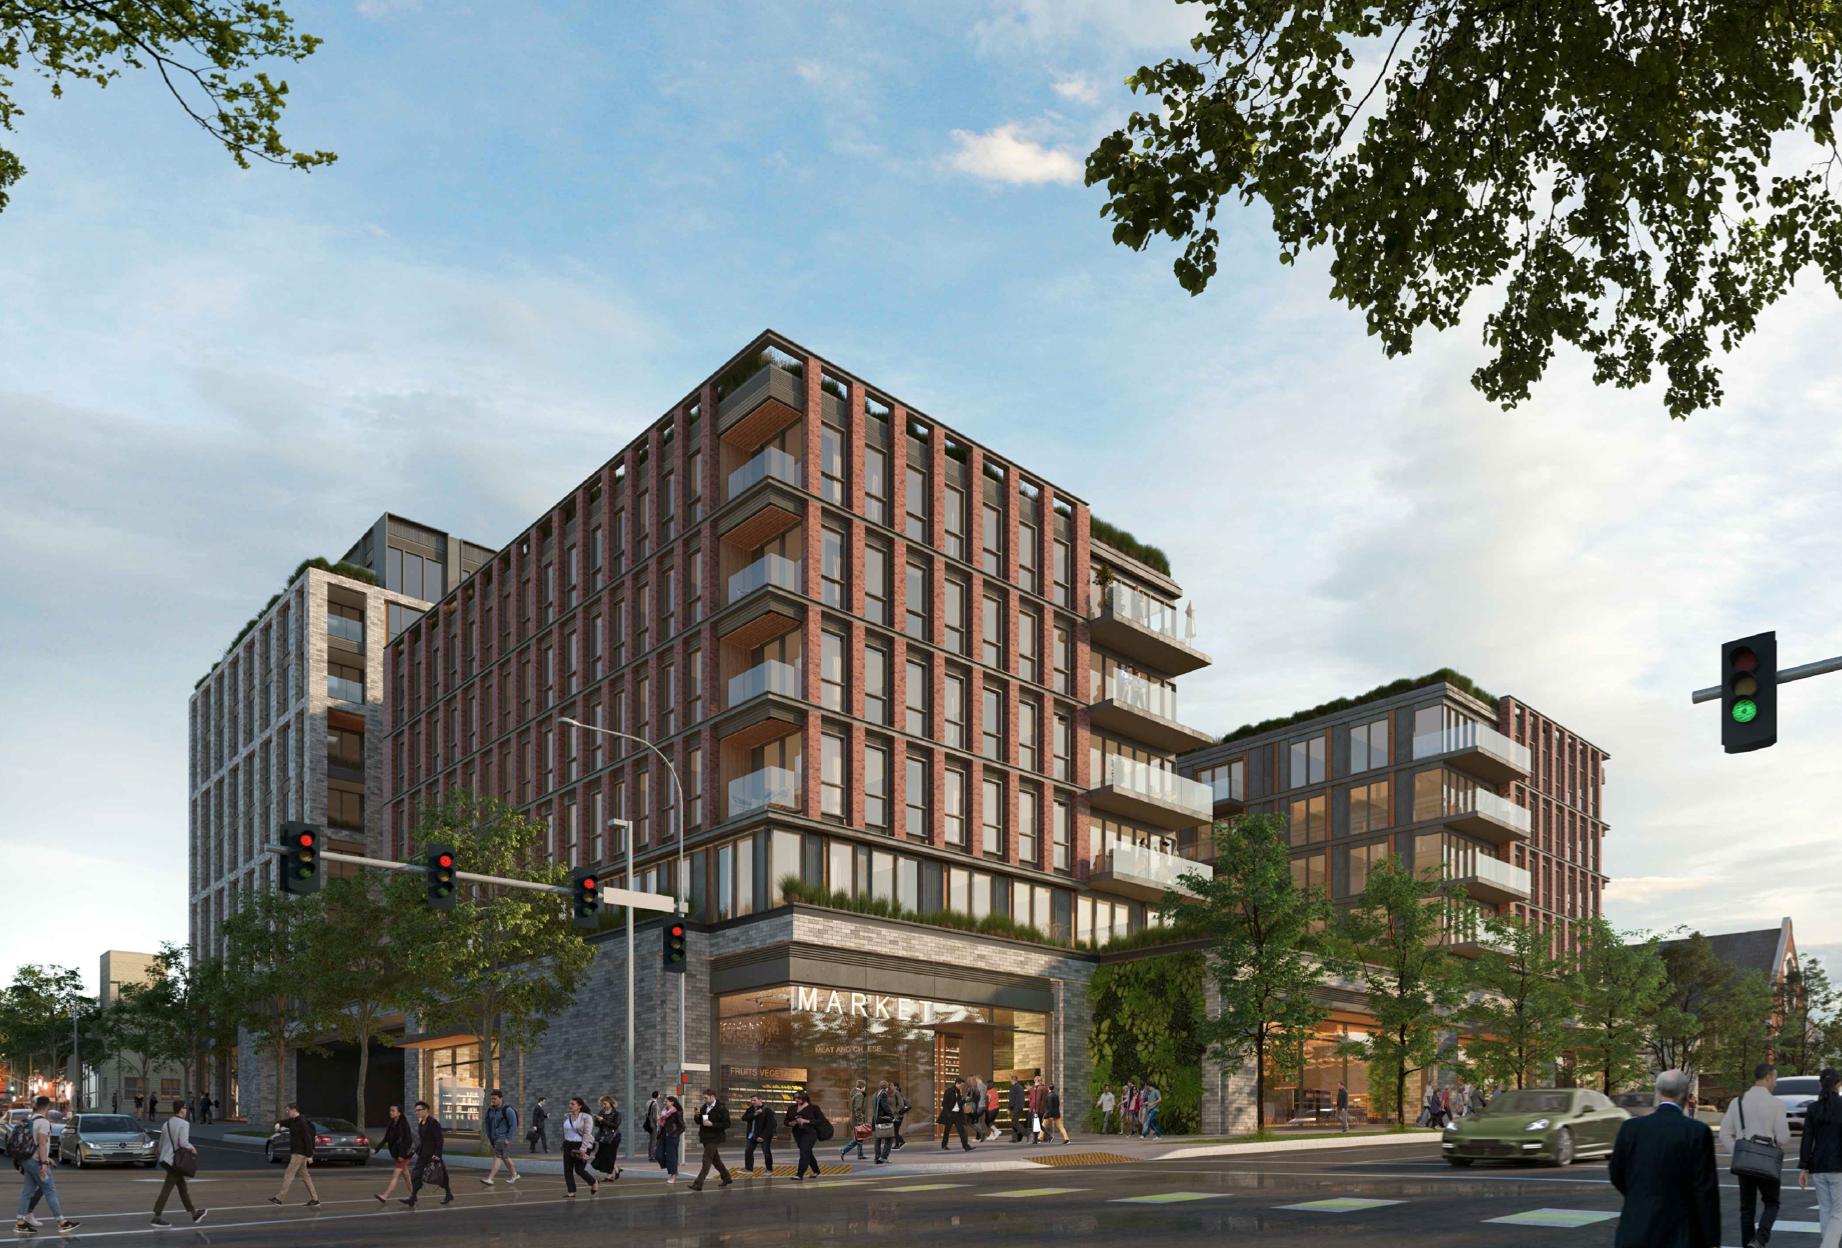 Mixed-Use Project Totaling 1.6M Sq Ft Submitted for Design Review Approval